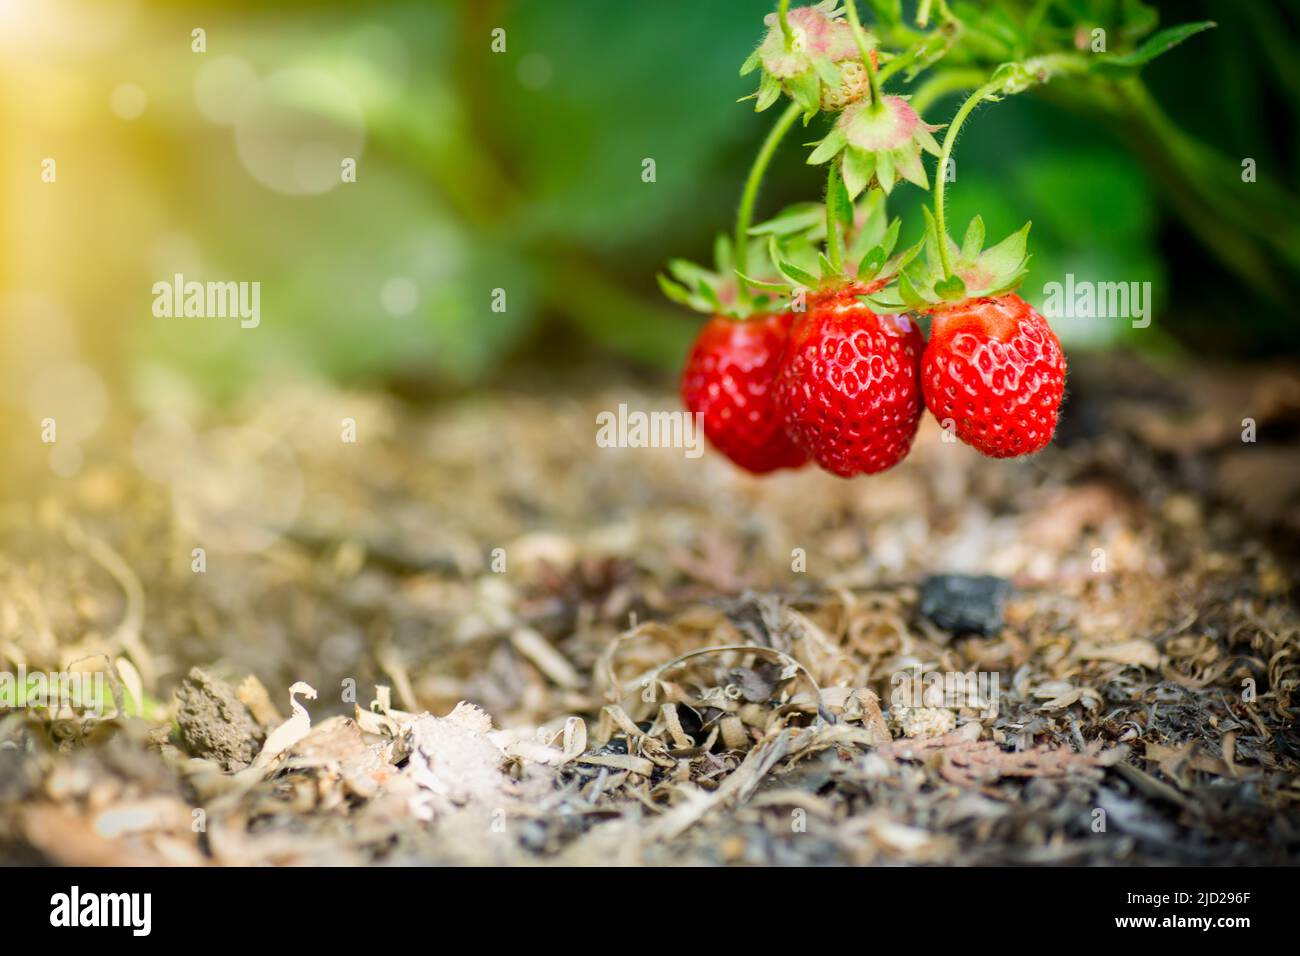 a bush of ripe red strawberries with leaves grows in the sun, outdoors. Stock Photo